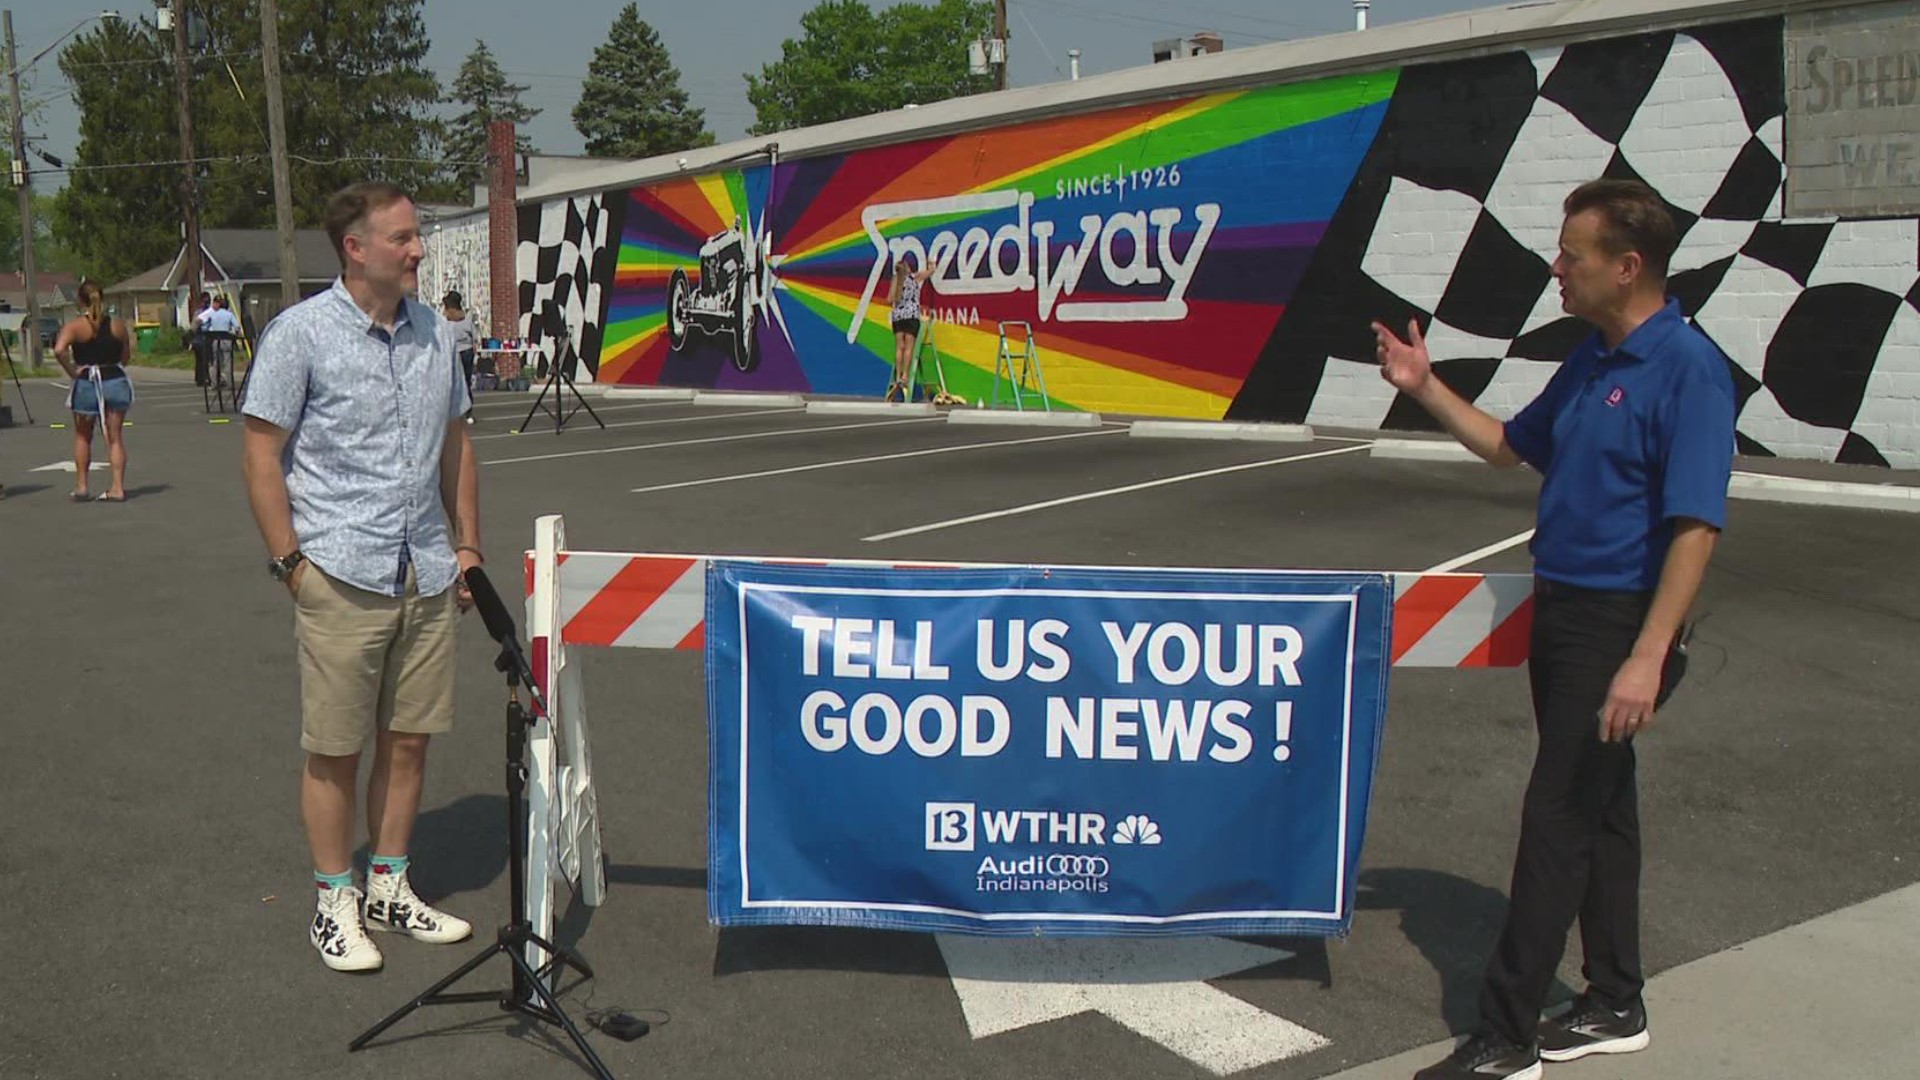 The Speedway community was invited to help create an IndyCar-themed mural, and the response was overwhelming.